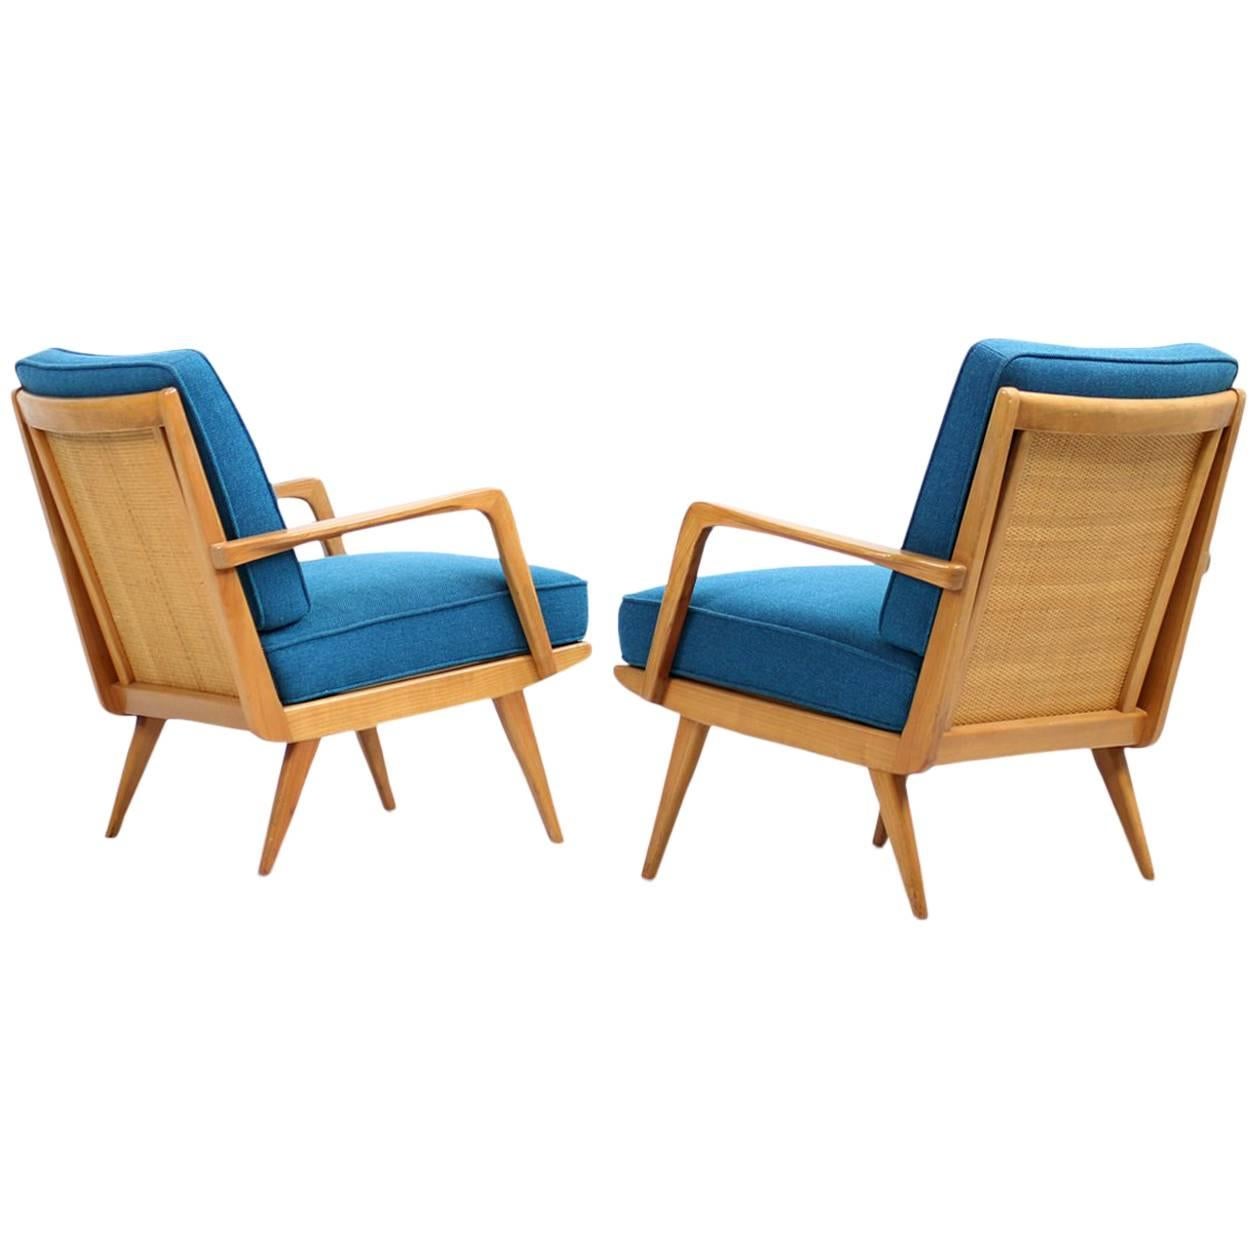 Pair of Beautiful Beechwood and Cane Lounge Easy Chairs, Mid-Century Modern For Sale